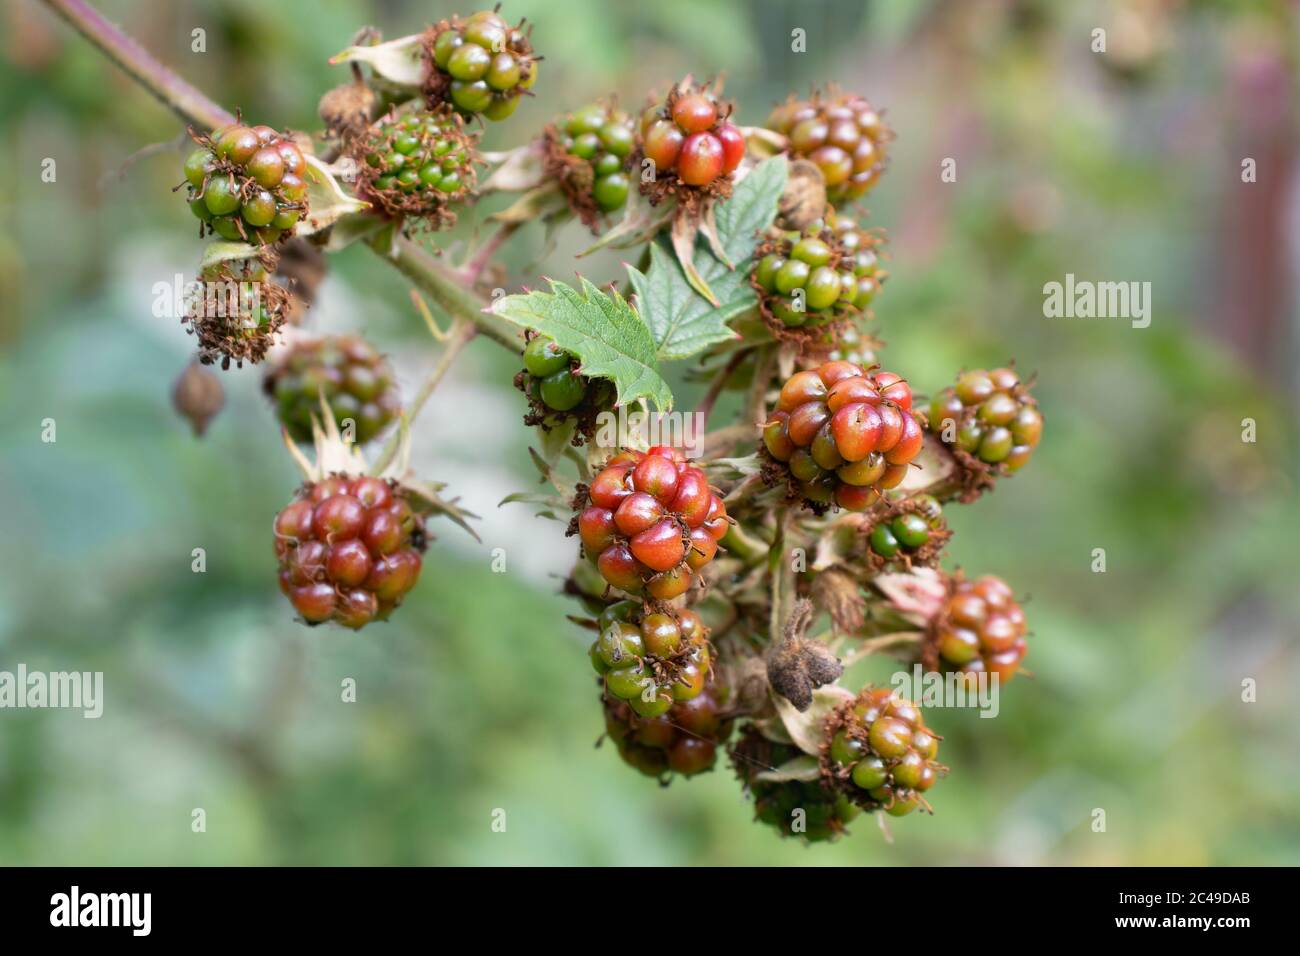 Branch with unripe blackberry in the summer garden, close-up Stock Photo